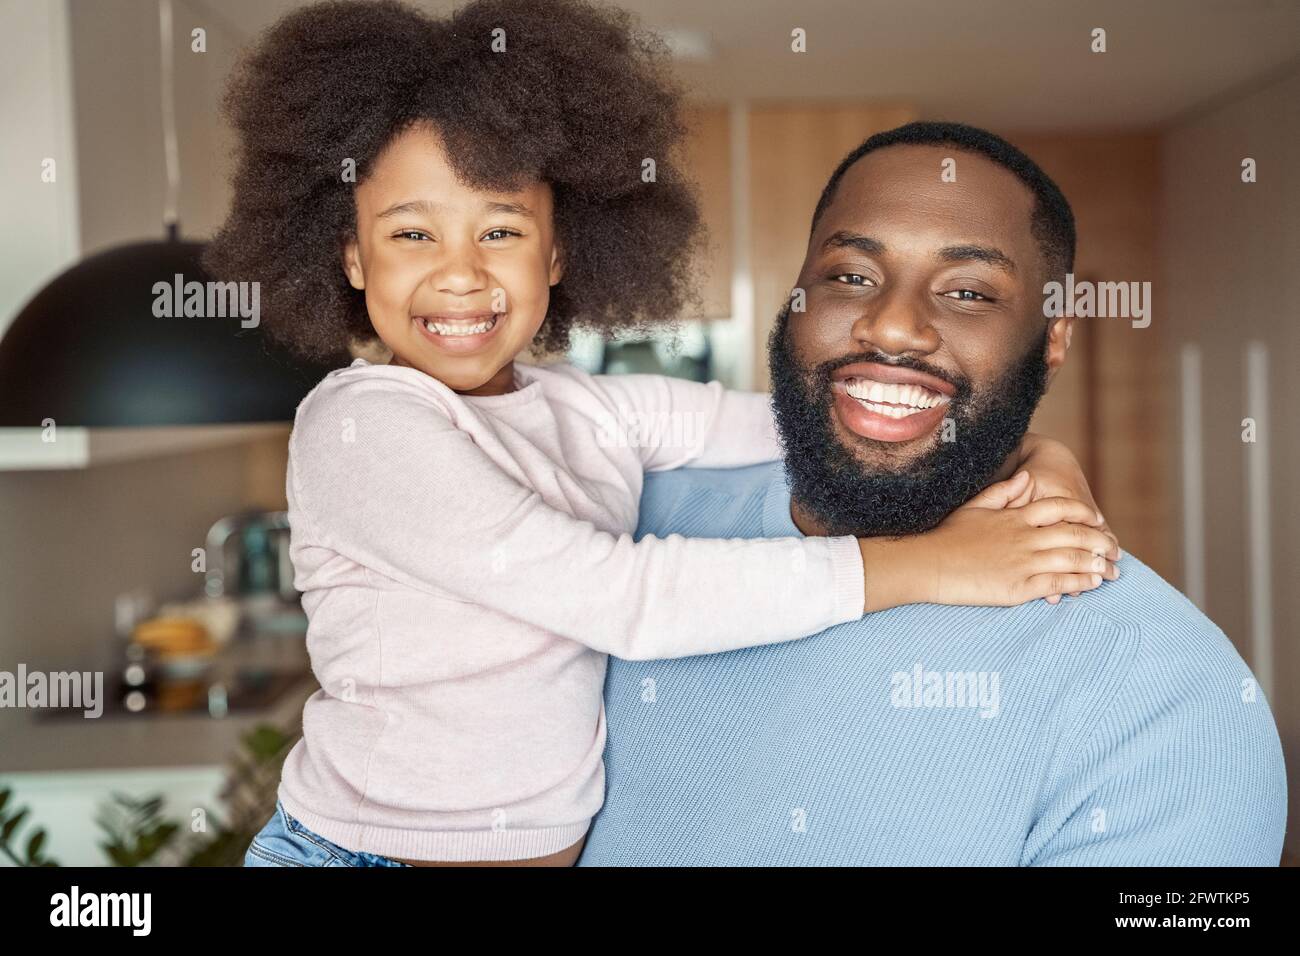 Toothy smiling happy young african american father and little daughter portrait Stock Photo